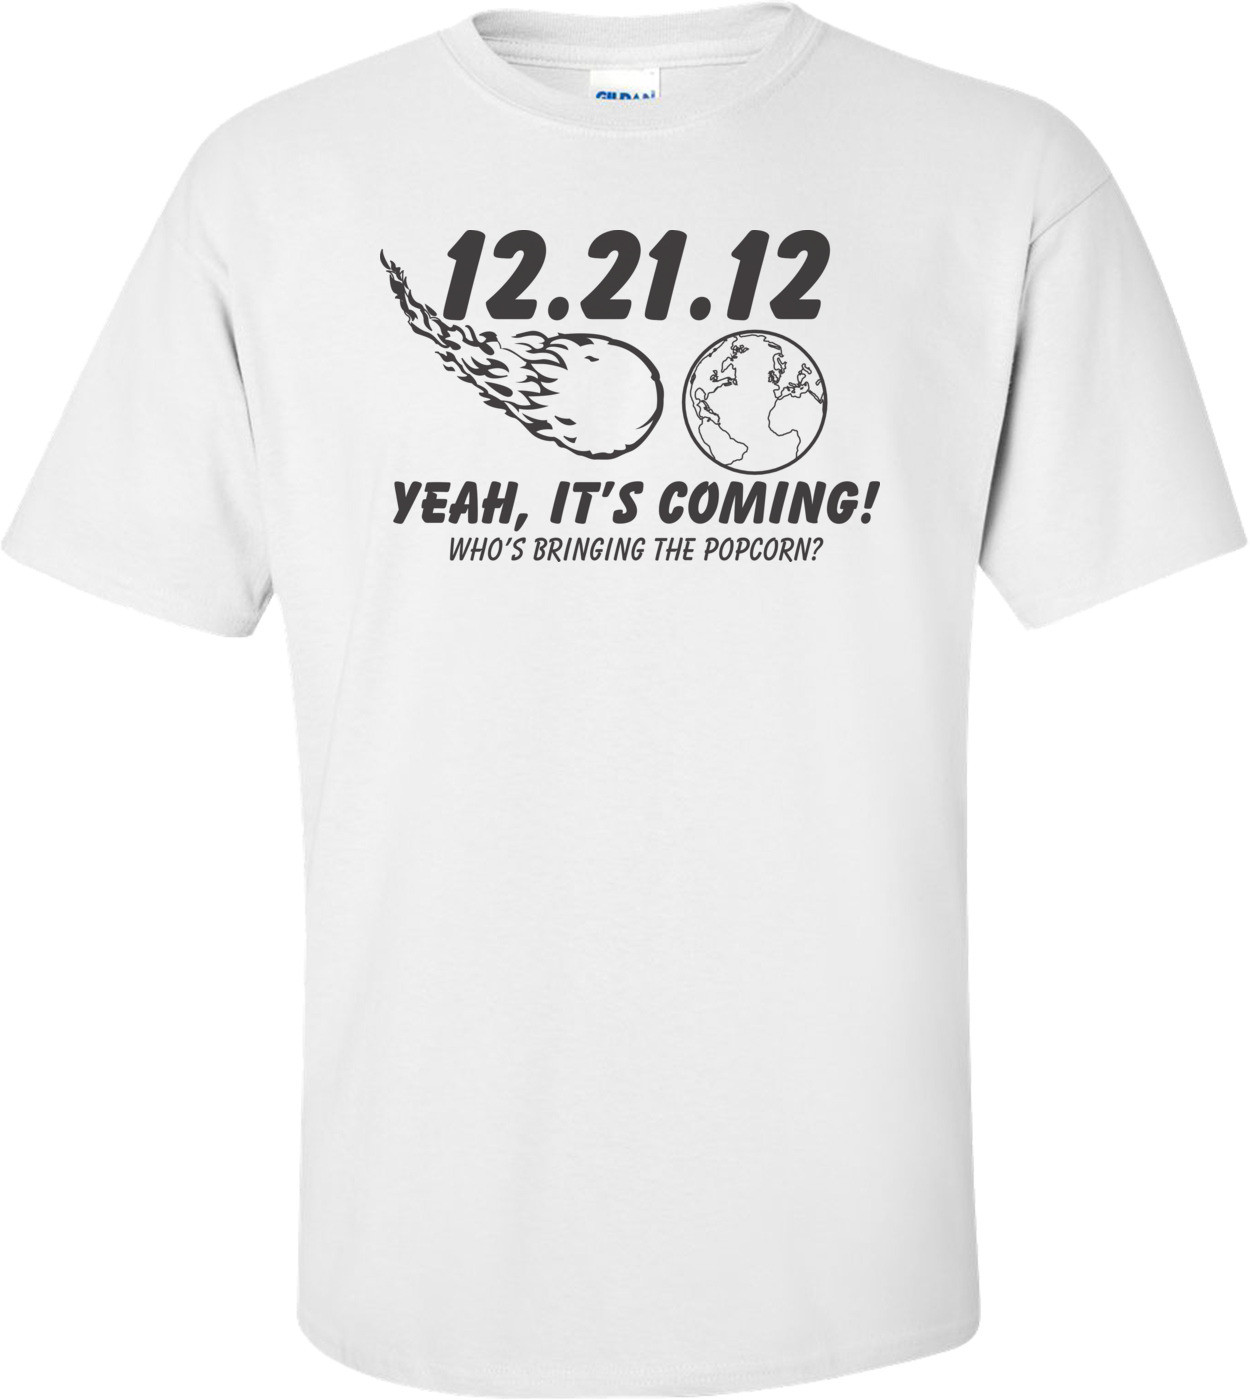 12.21.12 Yeah, It's Coming! Who's Bringing The Popcorn?